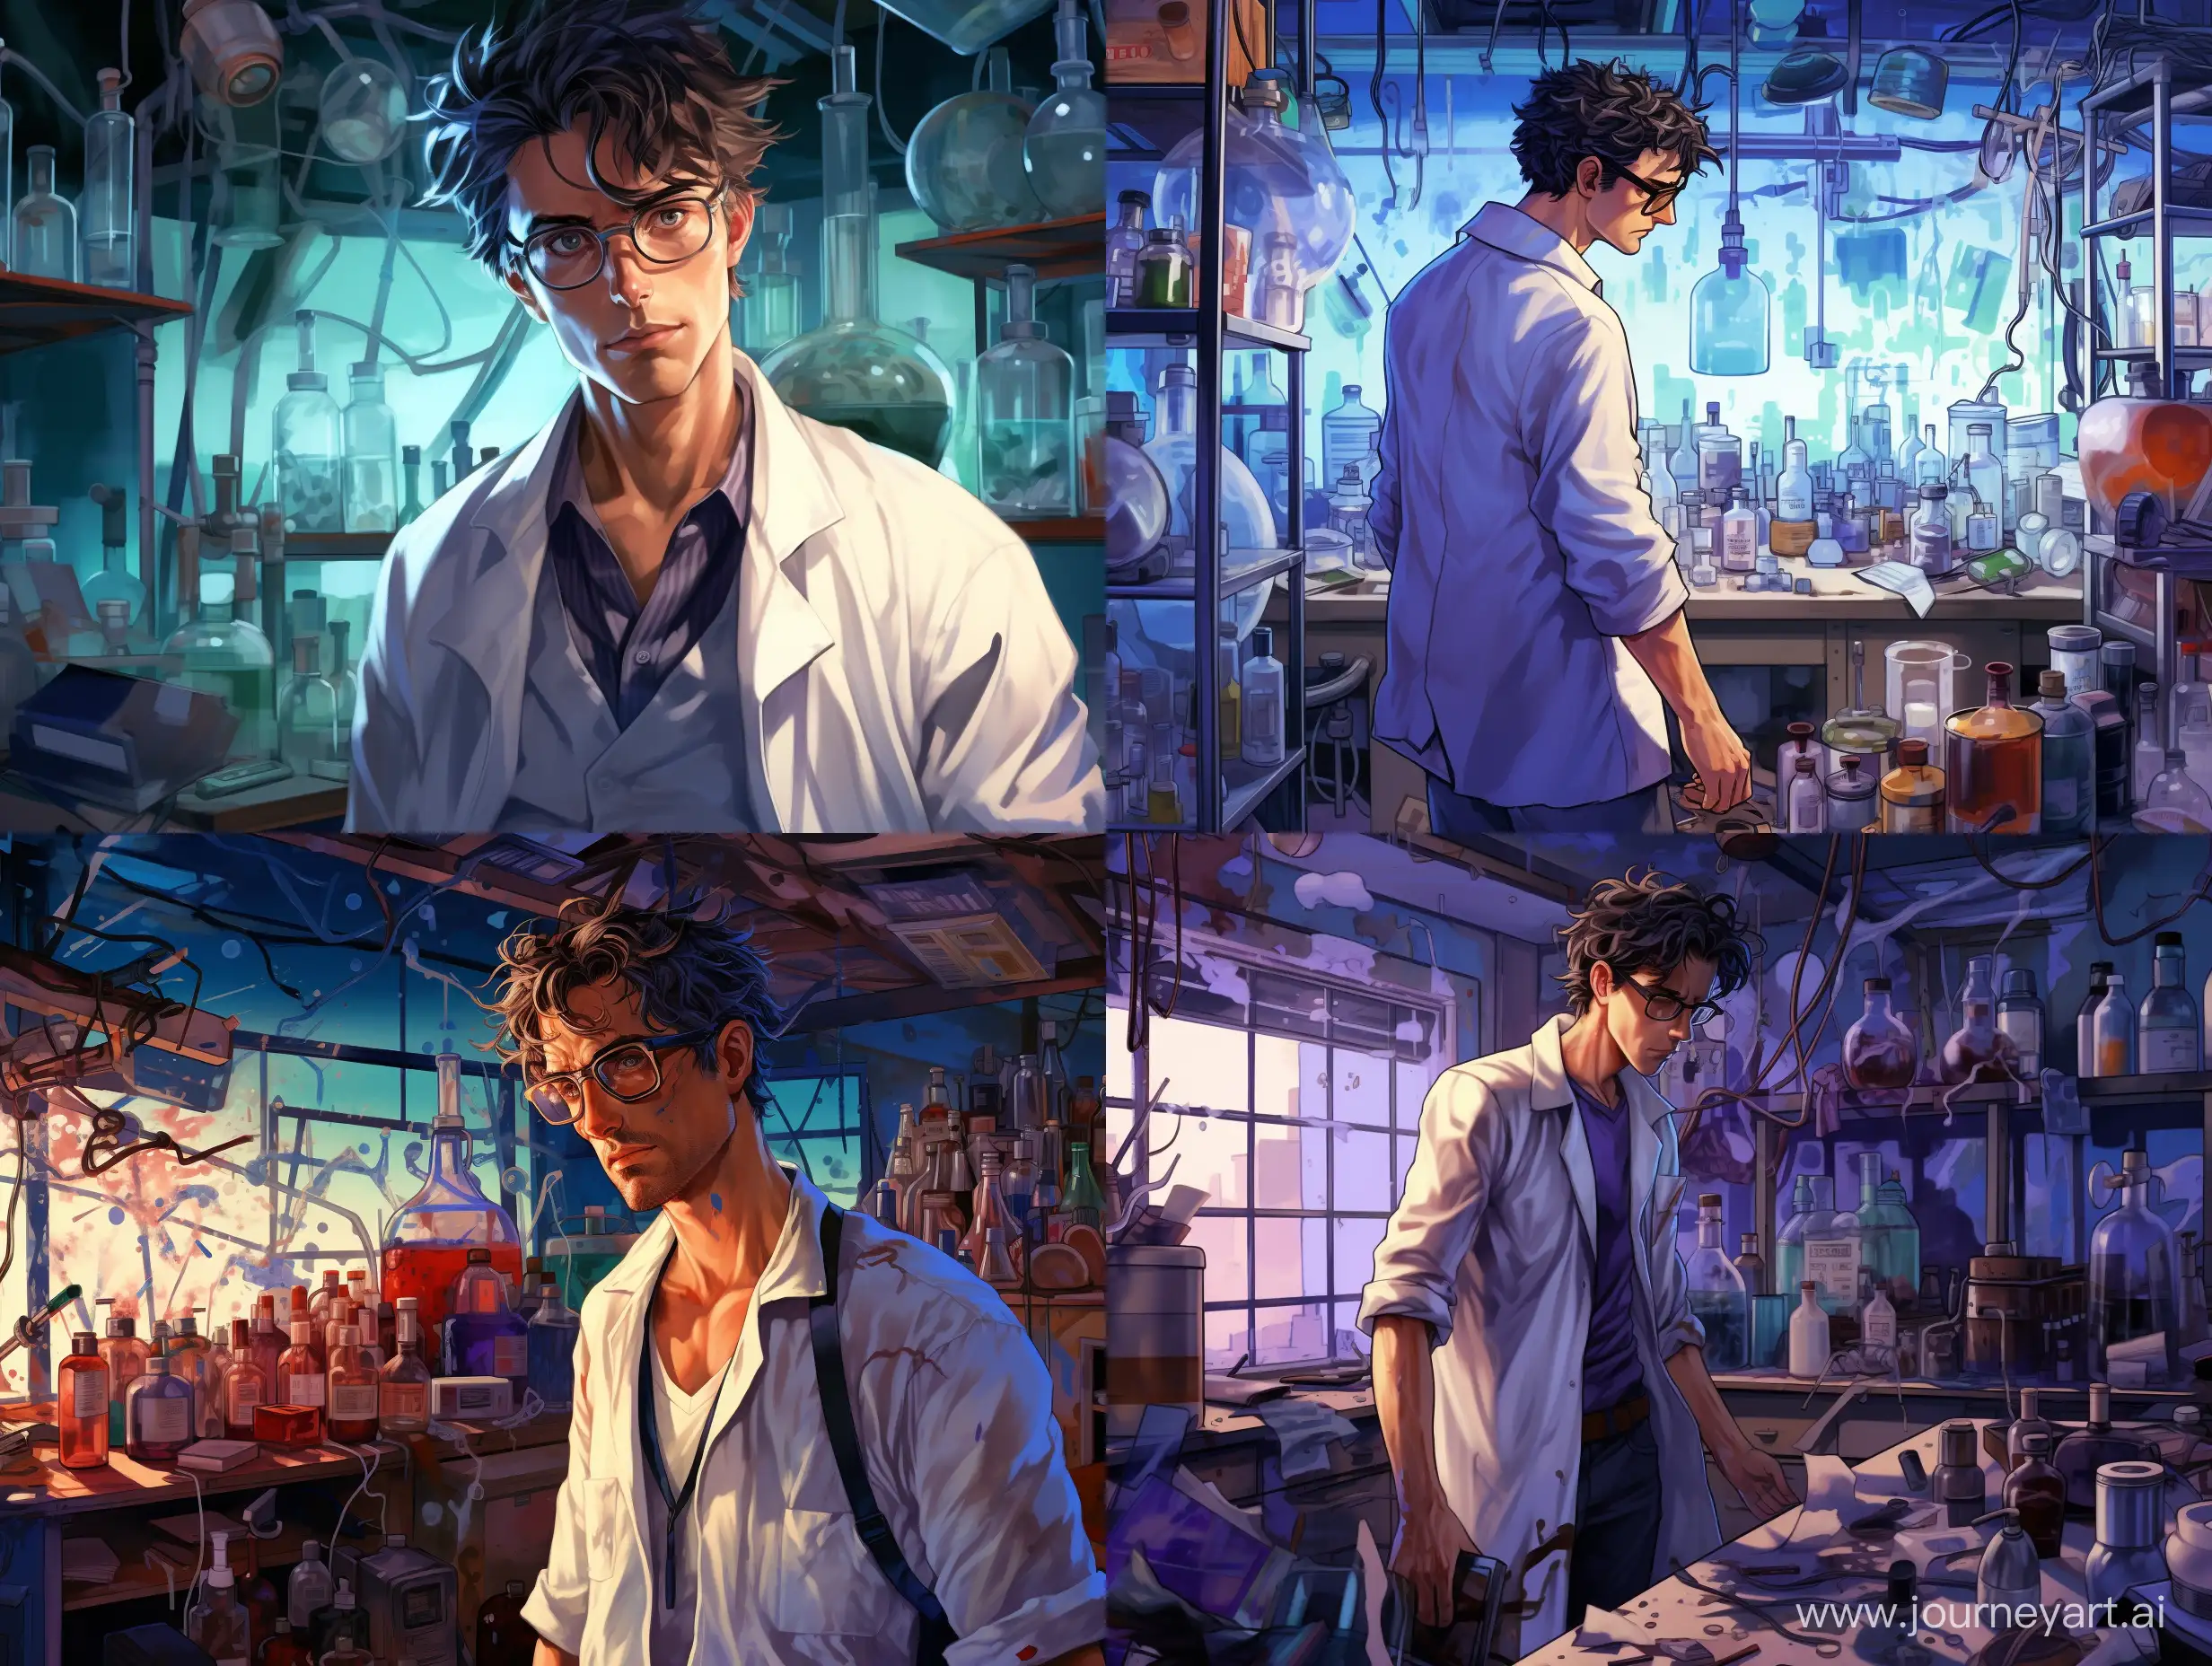 Experimental-Chemist-Amidst-Laboratory-Chaos-with-Bluish-Tubes-and-Chemicals